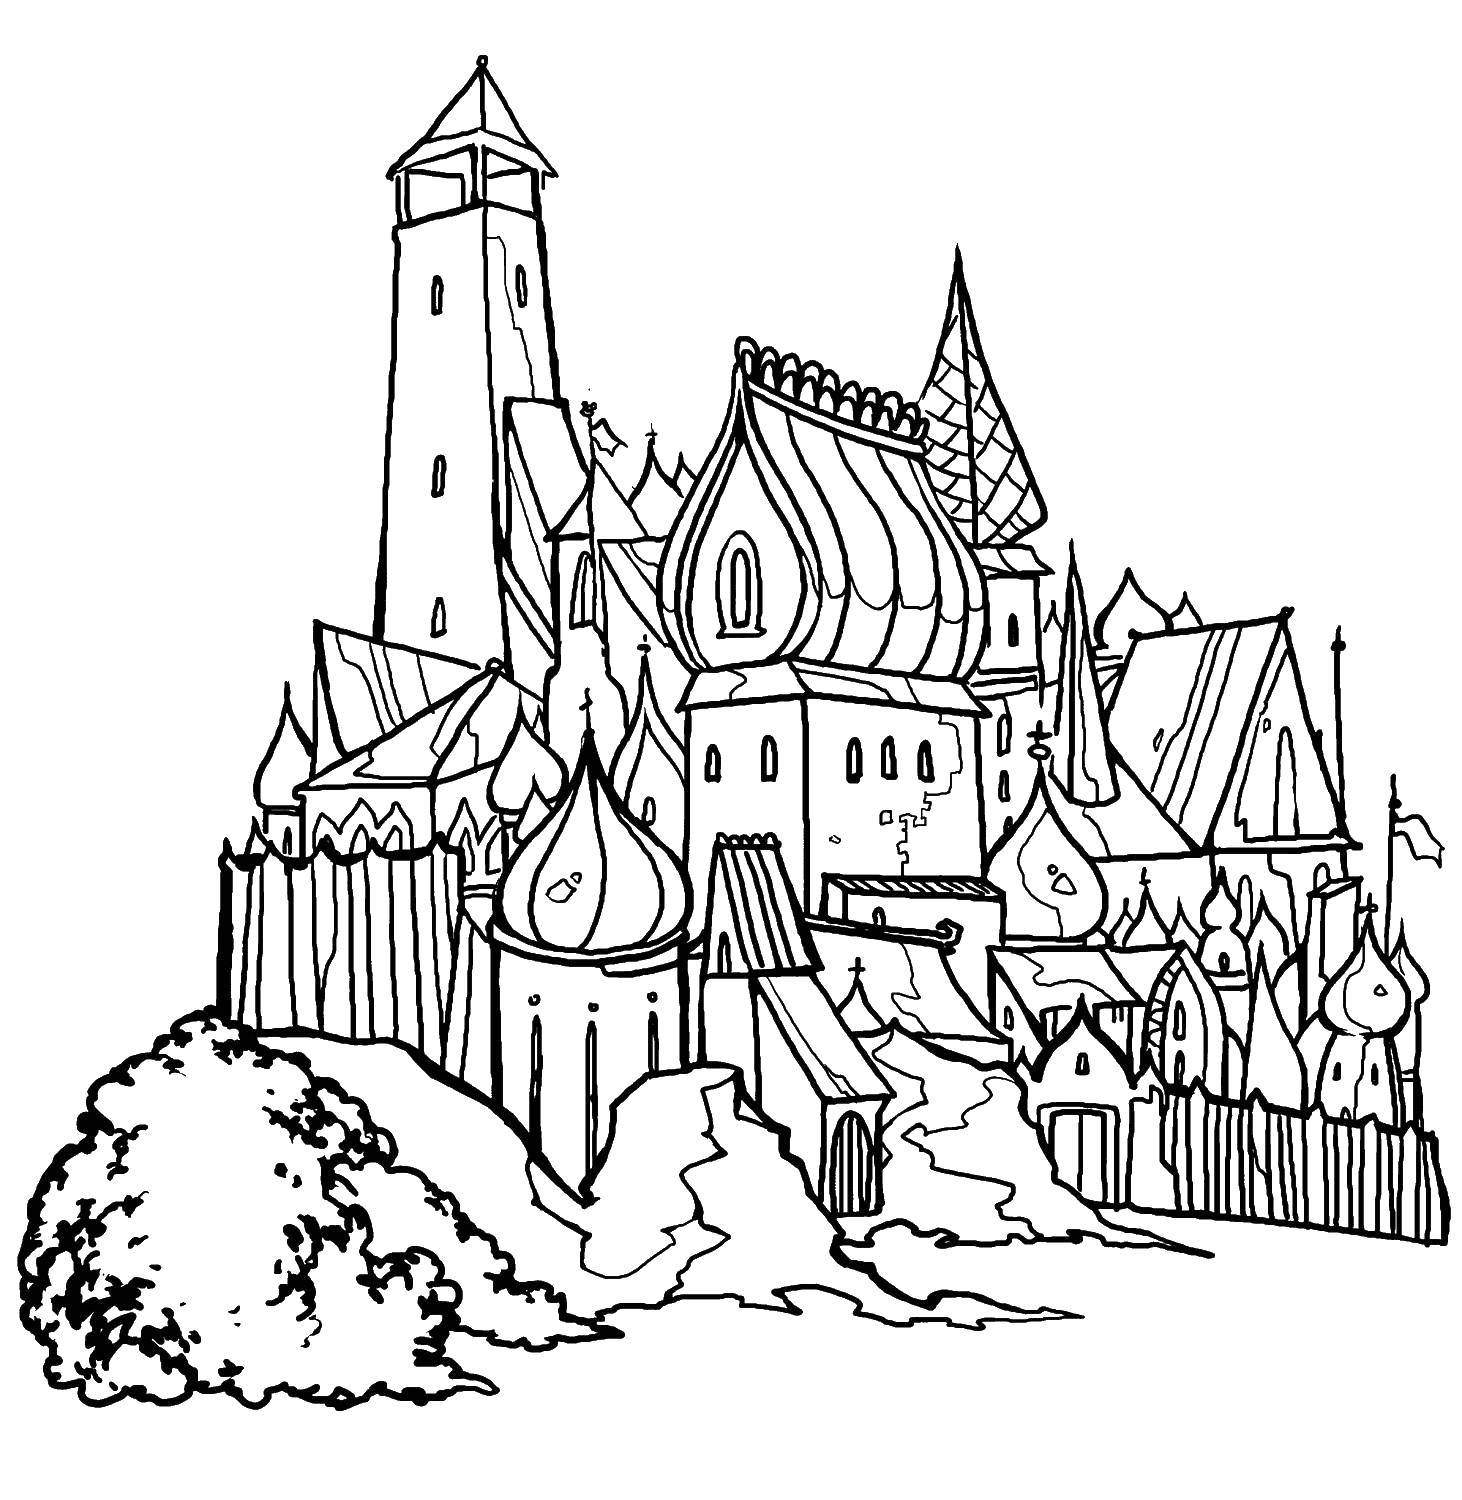 Coloring Palace. Category the tale of Tsar Saltan. Tags:  The Tale Of Tsar Saltan.